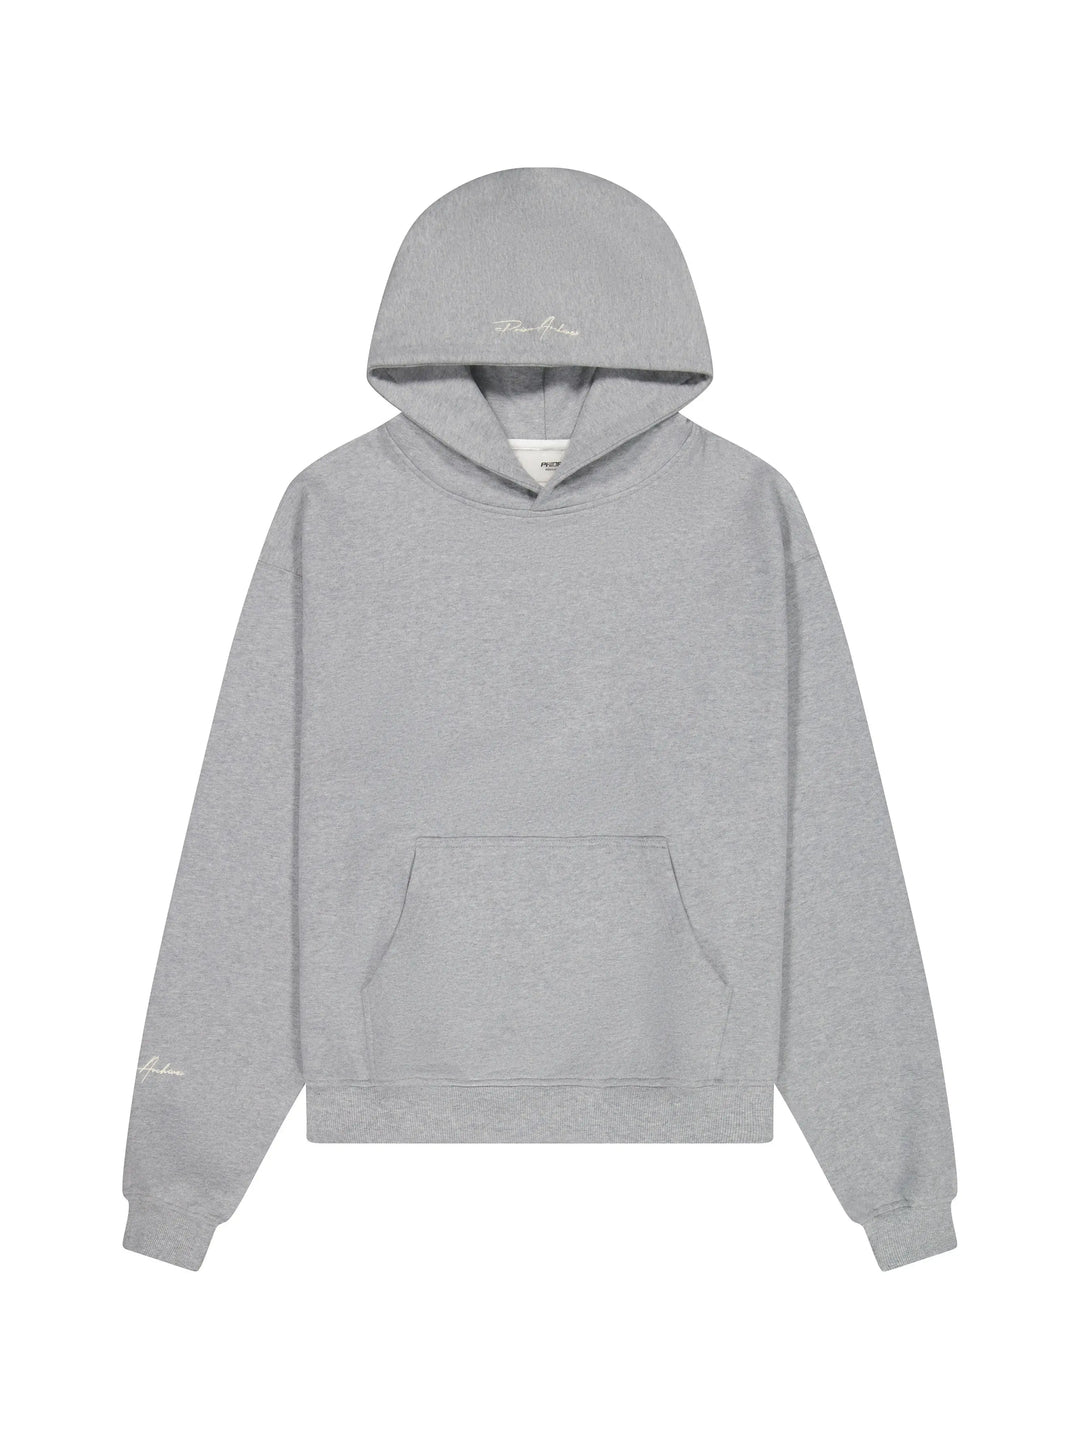 Prior Embroidery Logo Oversized Hoodie Heather Grey in Auckland, New Zealand - Shop name